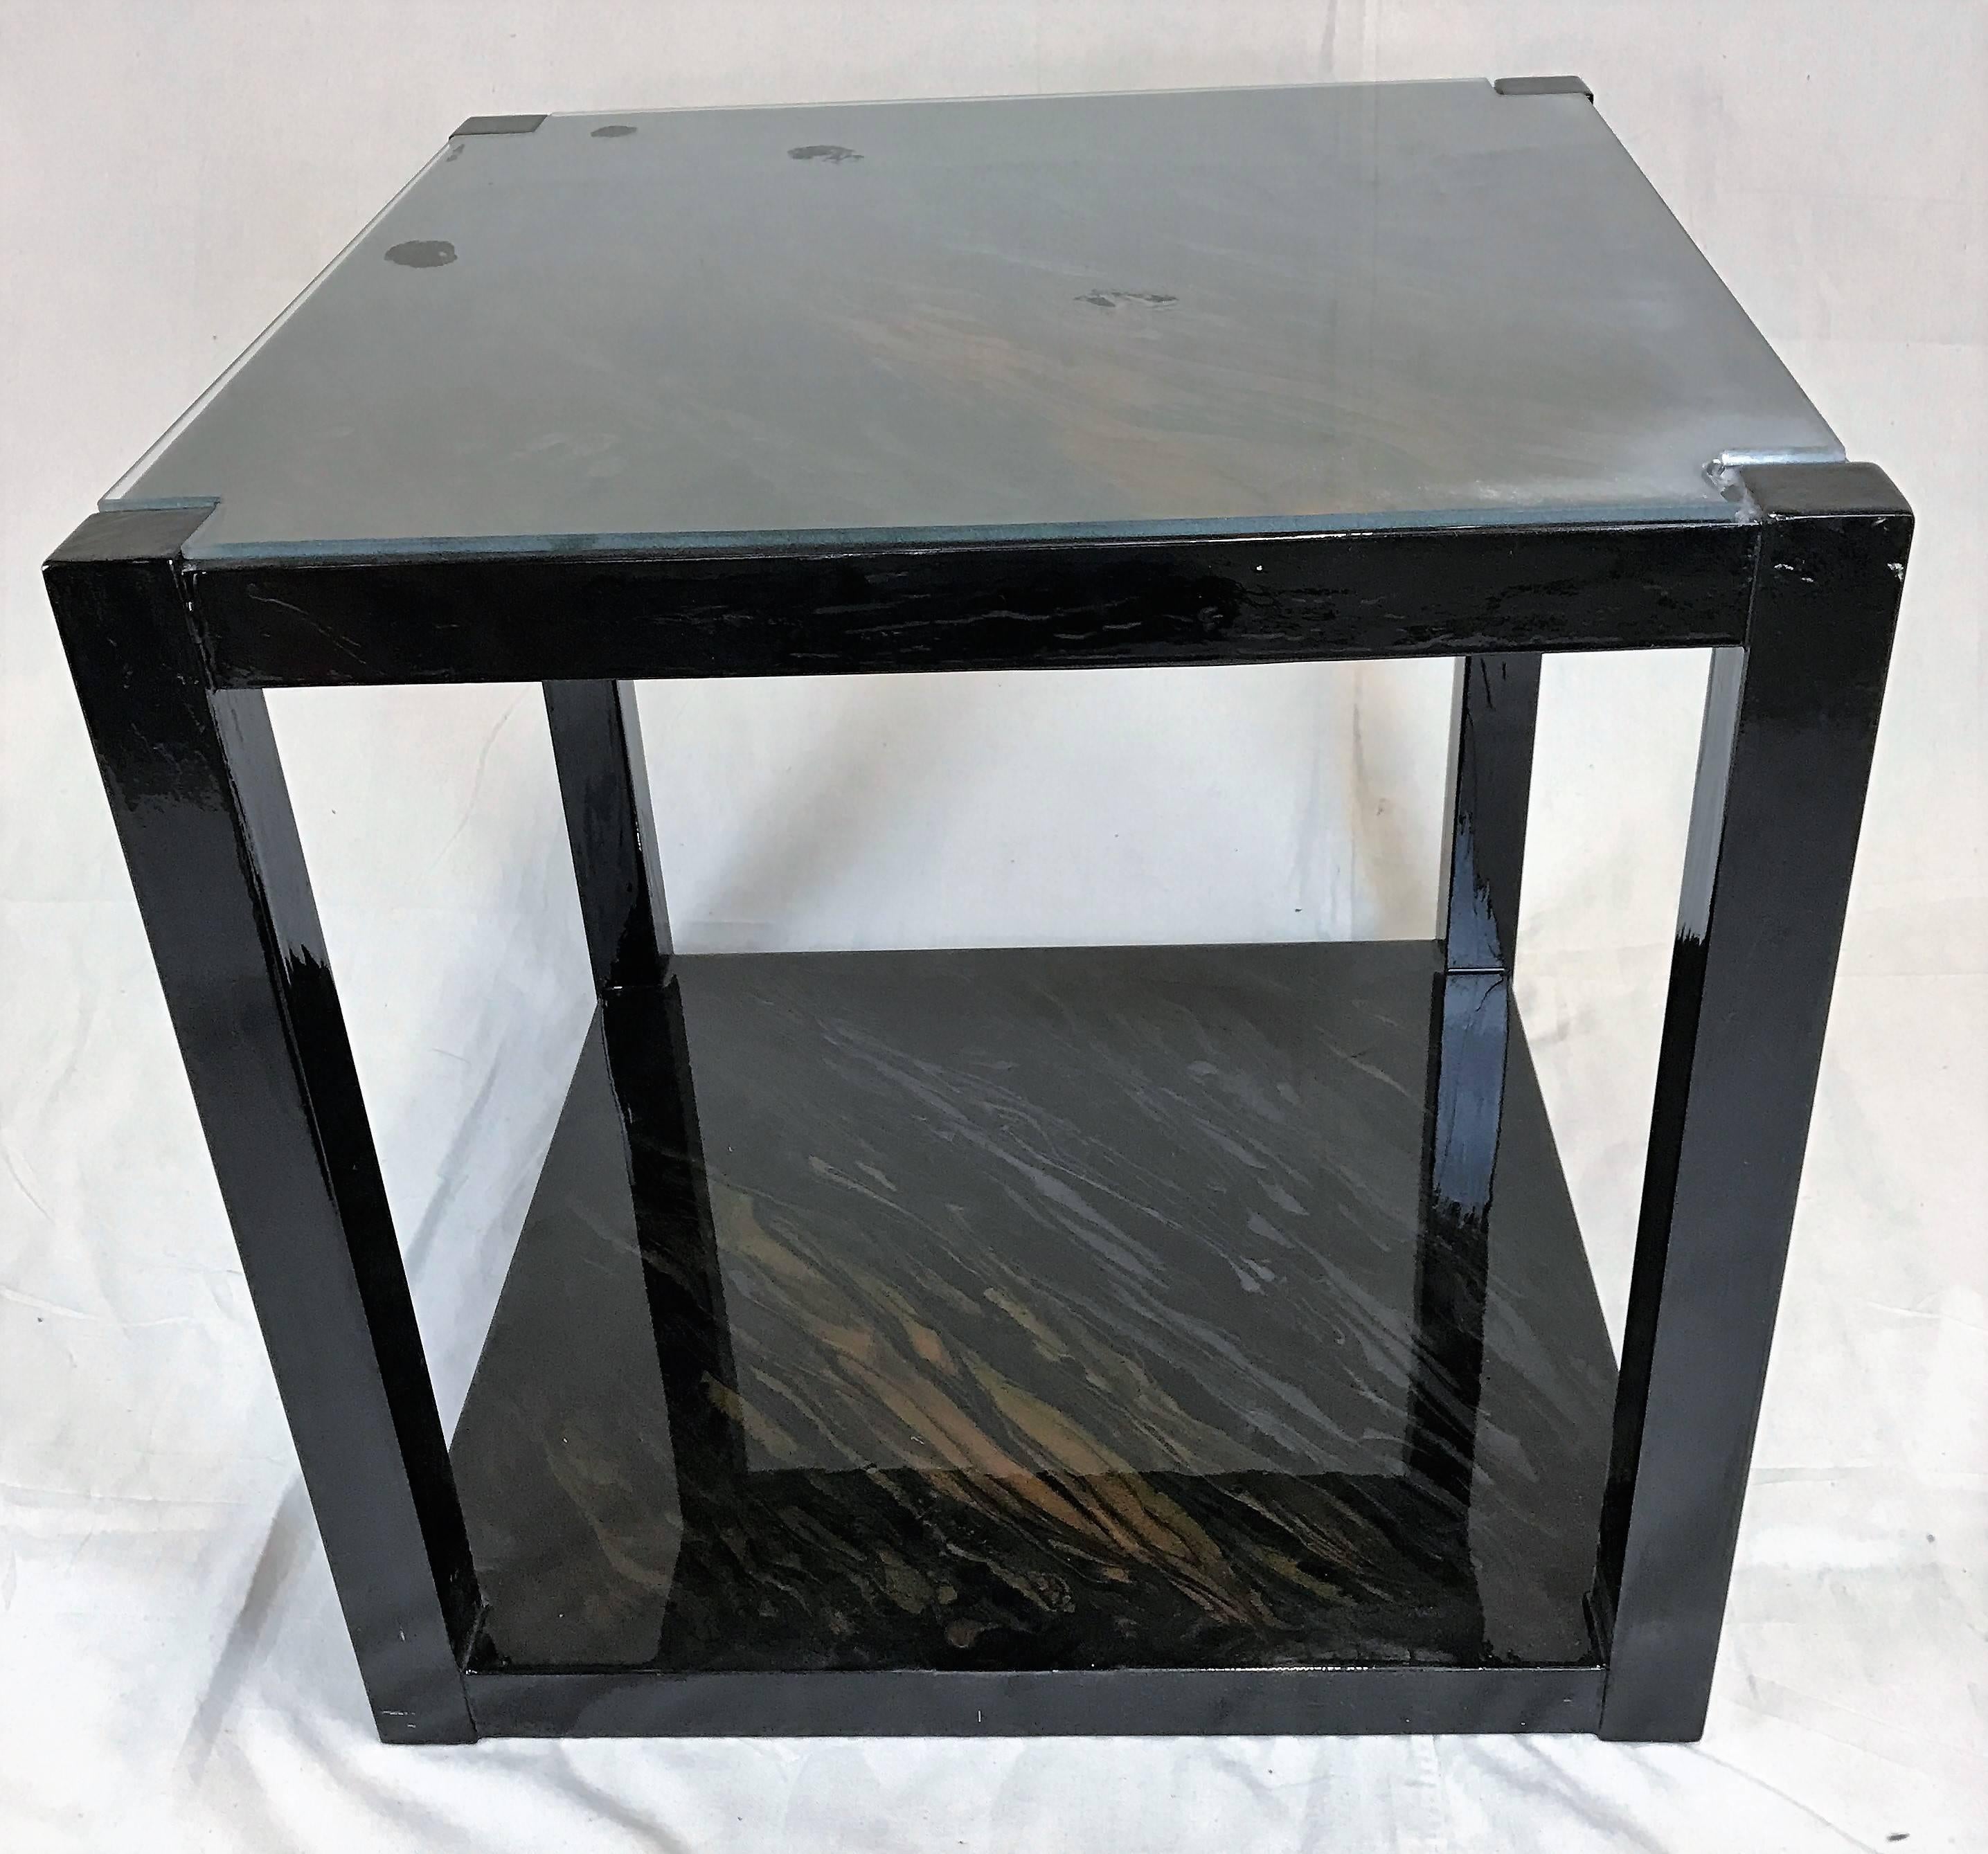 William Loyd, a Houston, Texas artist, creates each object he works with into a stunning piece of art. These lacquered tables are no different. While the tables appear black, upon closer look the brilliant colors used come through in the finish.